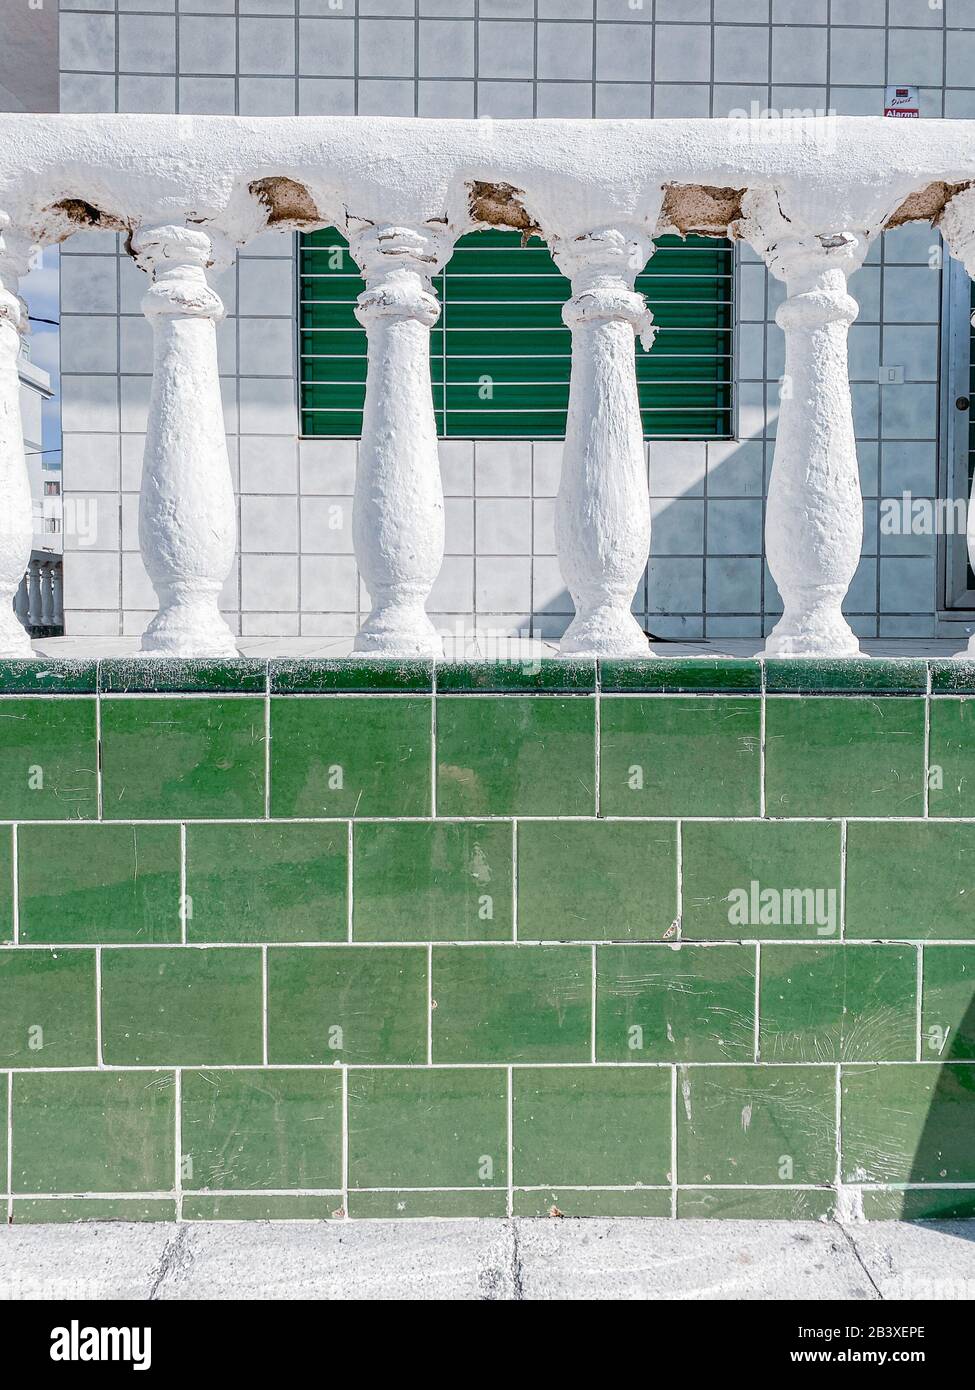 Old balustrade on the wall decorated with green tiles. Image made on mobile phone Stock Photo